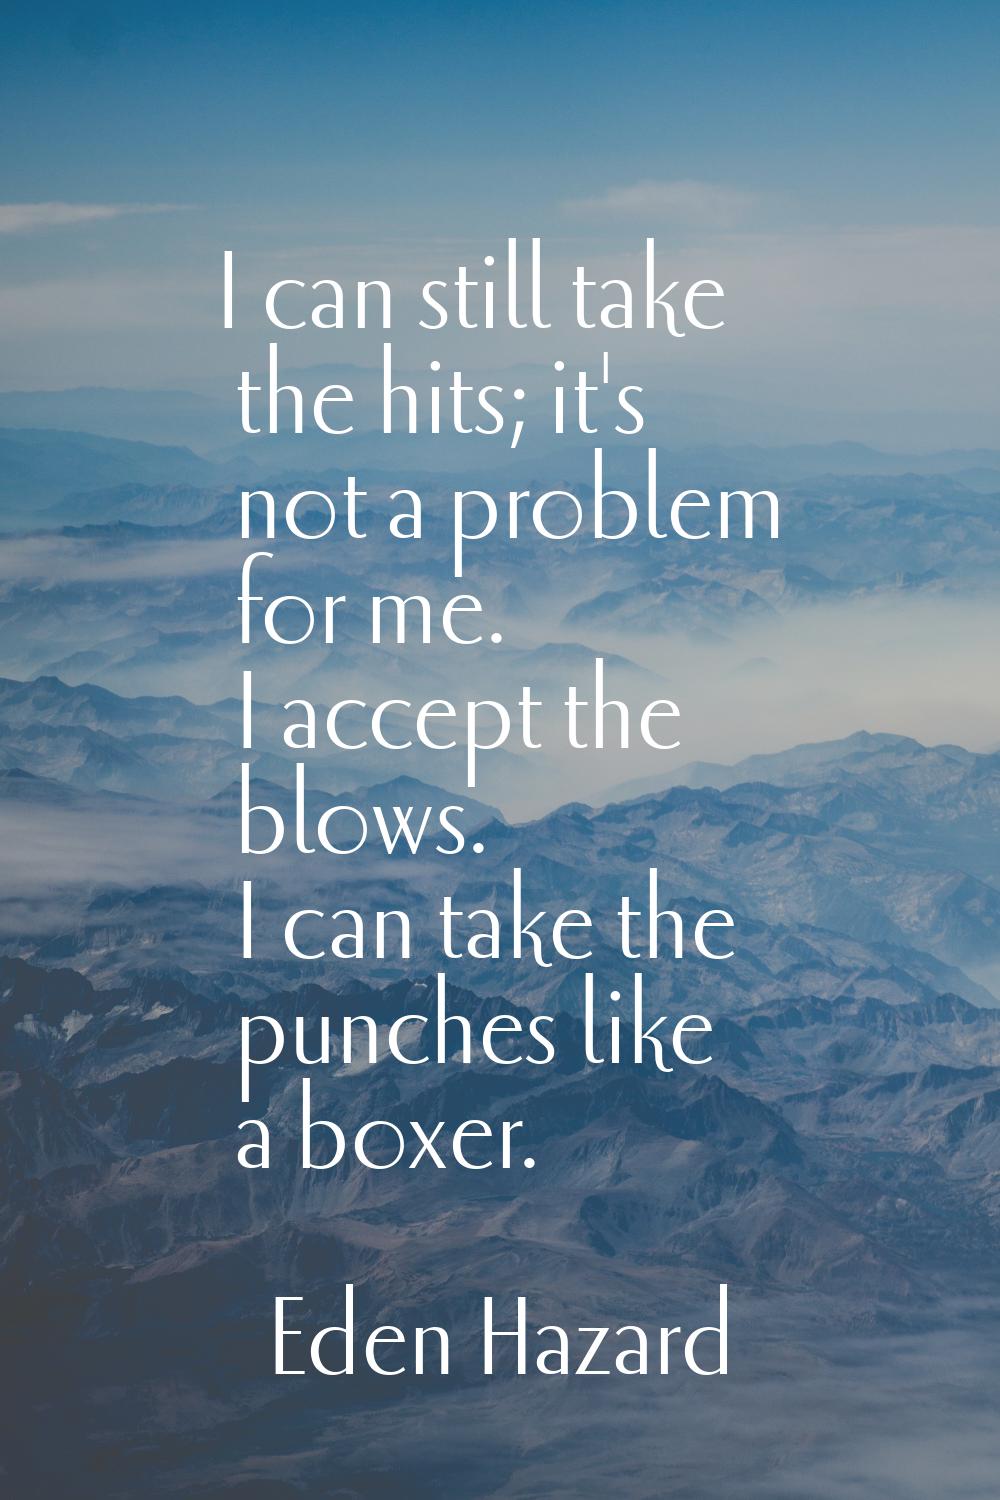 I can still take the hits; it's not a problem for me. I accept the blows. I can take the punches li